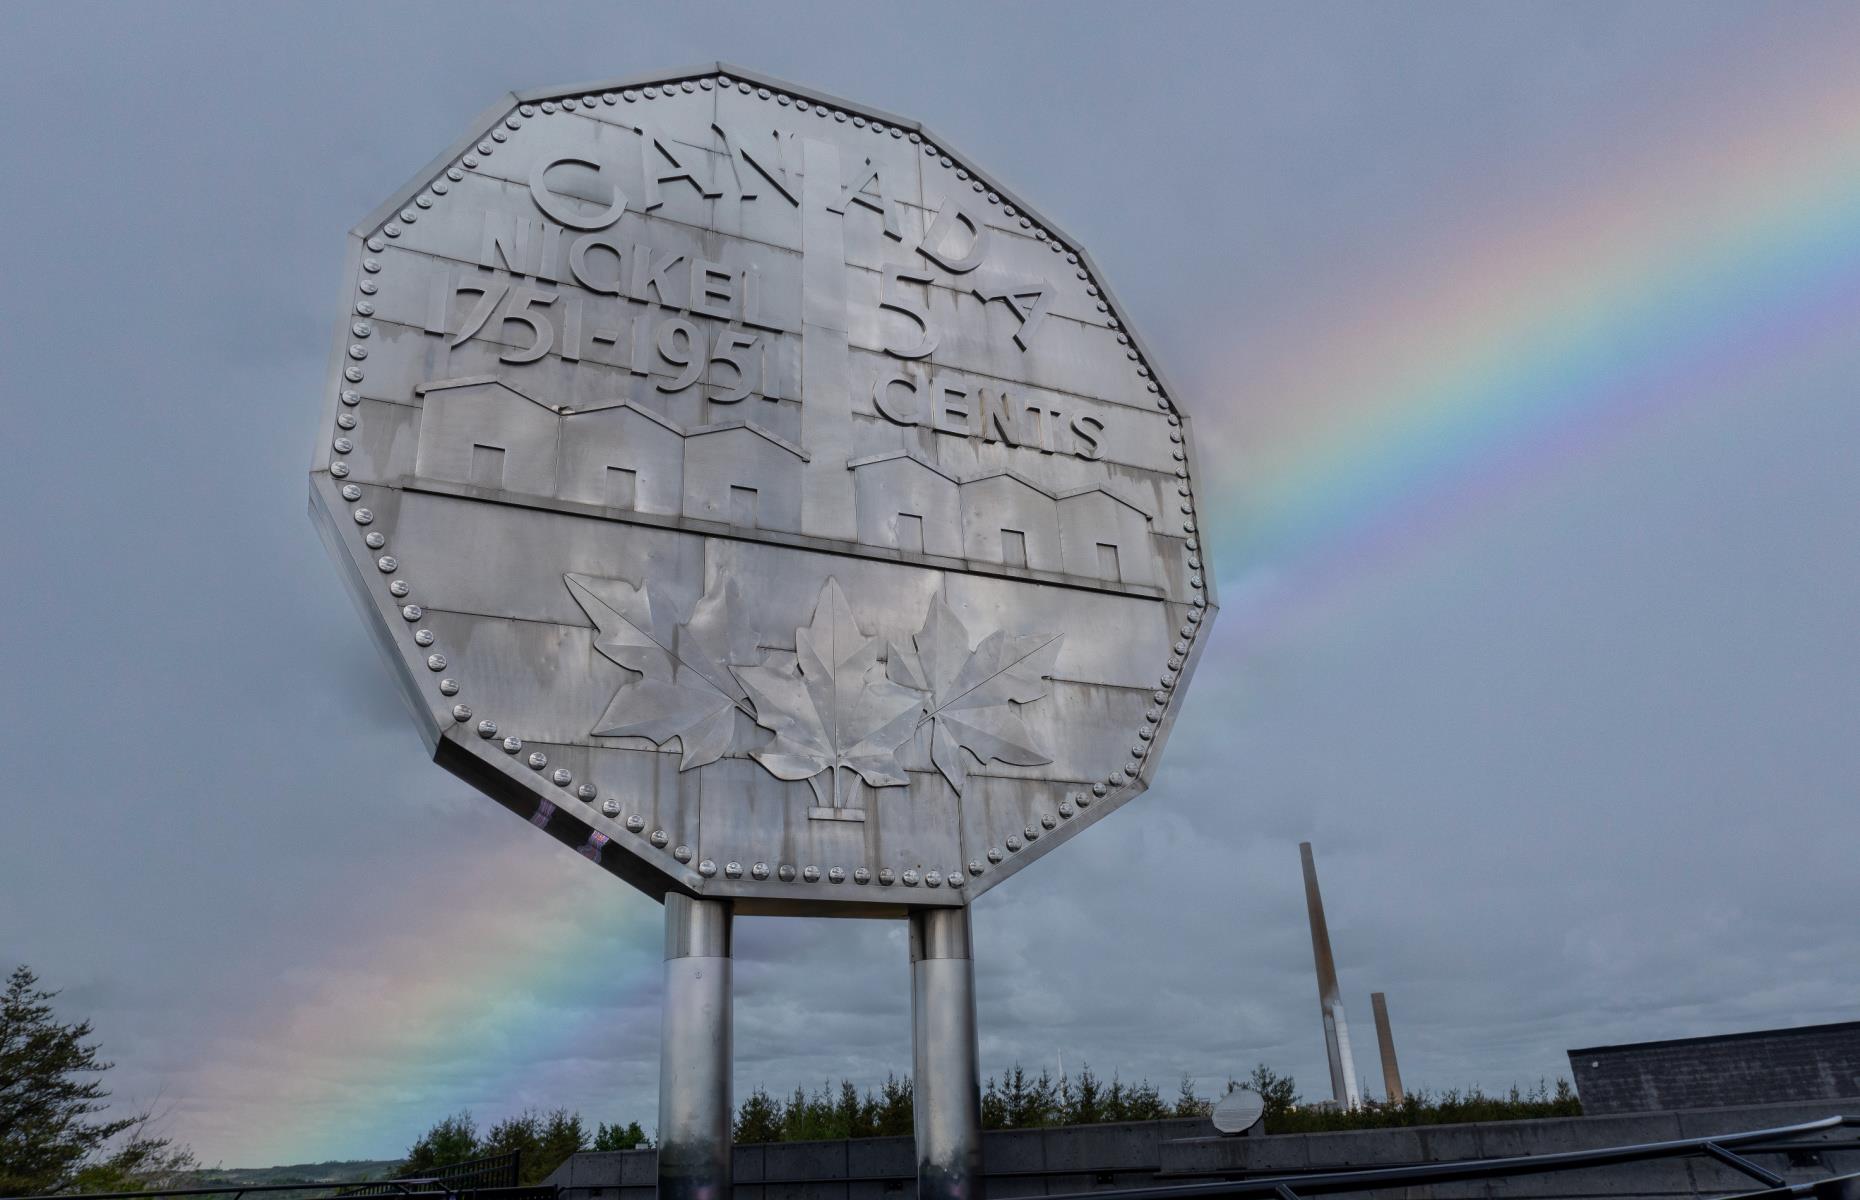 <p>Have you ever wanted to see the world’s largest nickel? Well, there’s a 30-foot replica in Sudbury, Ontario. How about a 25-foot non-edible pyrogy? That’s in Glendon, Alberta. Elsewhere in Canada you might stumble across the world’s largest curling rock (Arborg, Manitoba), a 17-foot-tall Cheeto complete with finger dust (Cheadle, Alberta), and the world’s second largest Easter Egg (Vegreville, Alberta), all free to be enjoyed by anyone lucky enough to be driving by.</p>